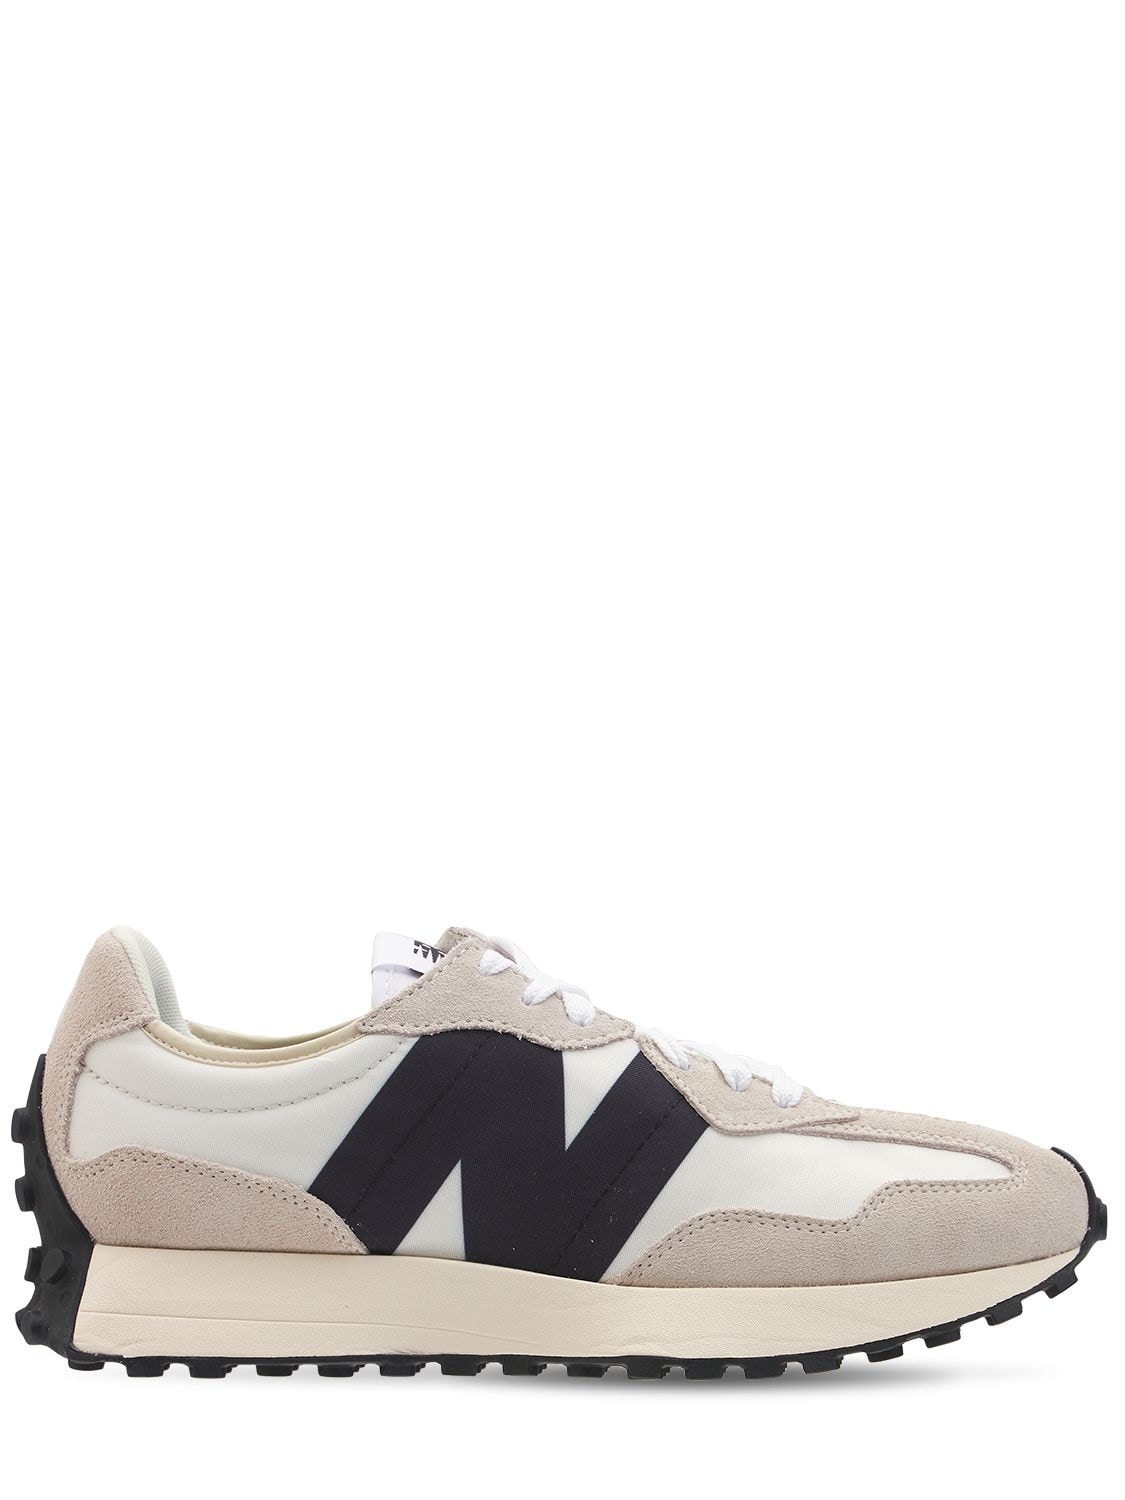 New Balance 327 Sneakers In Off White,black